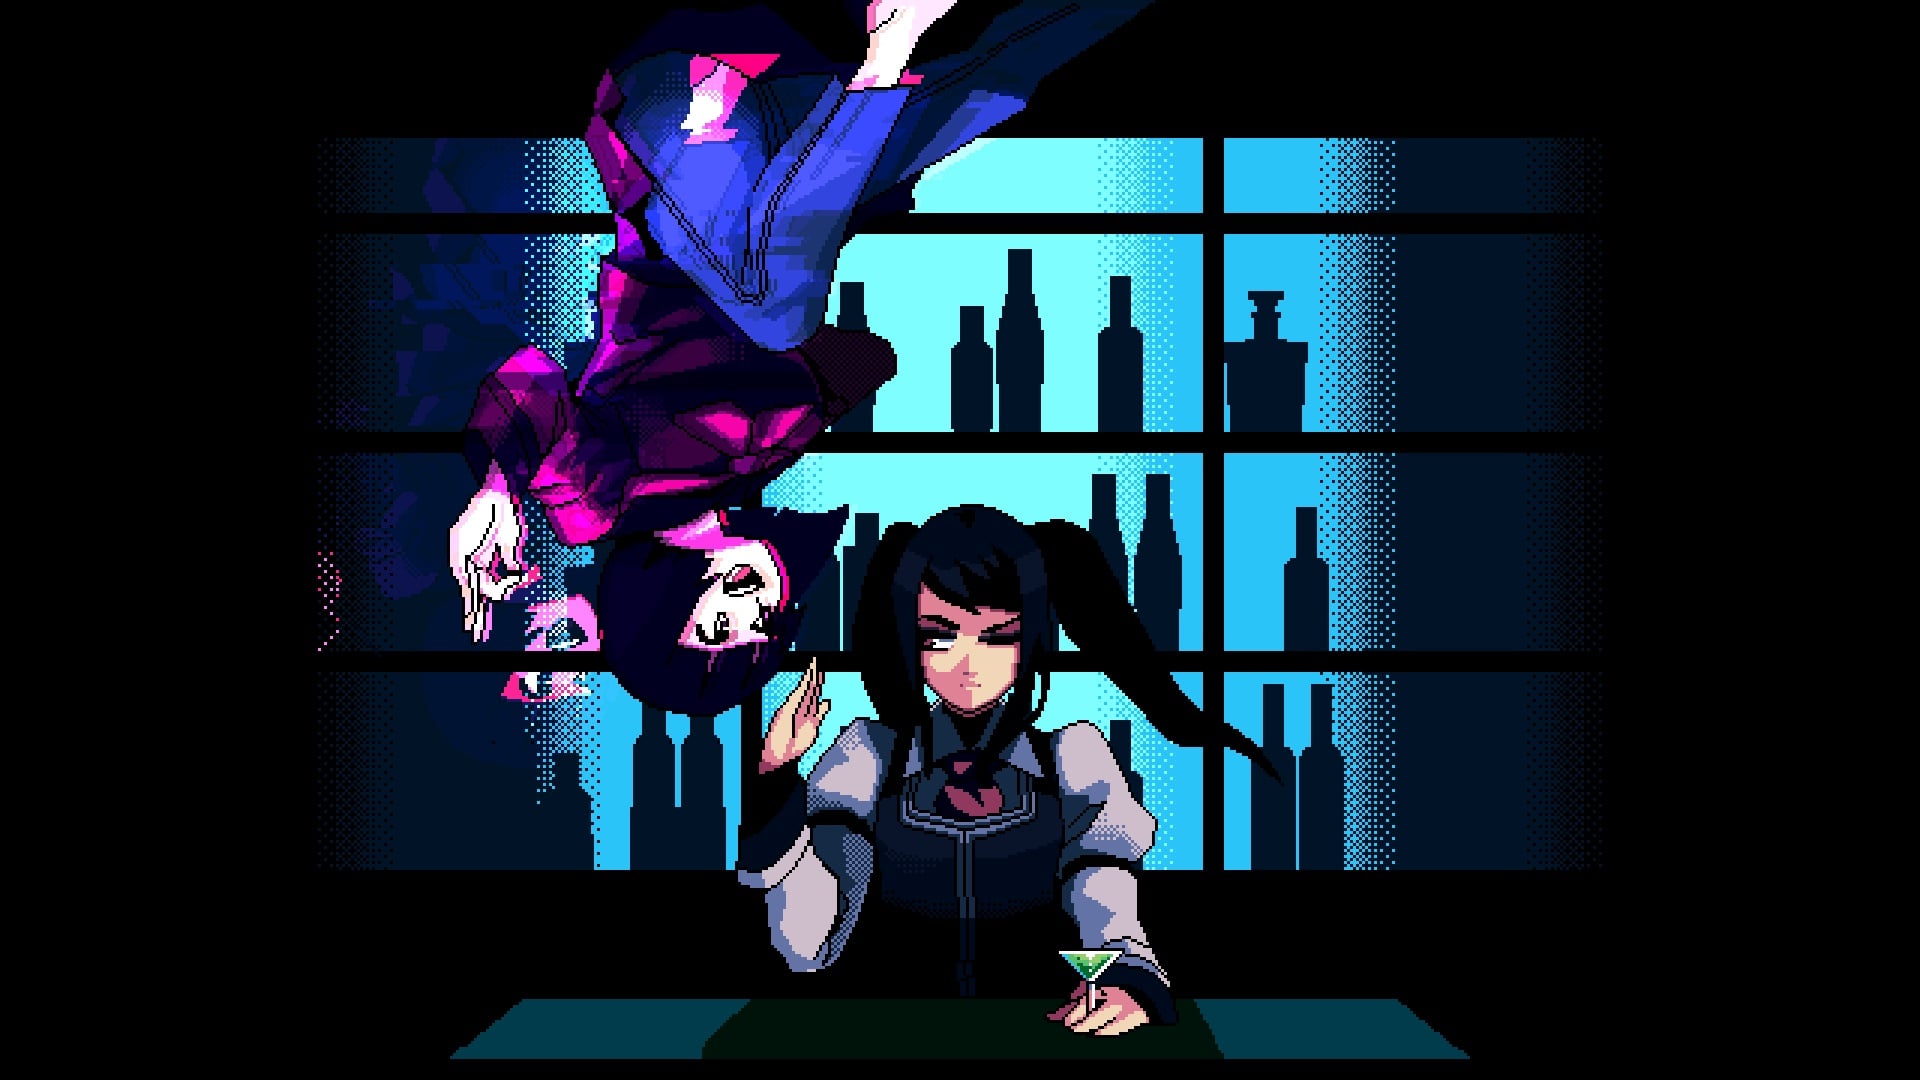 Va 11 Hall A Ps4 Review Mixing Drinks And Changing Lives Gamervw